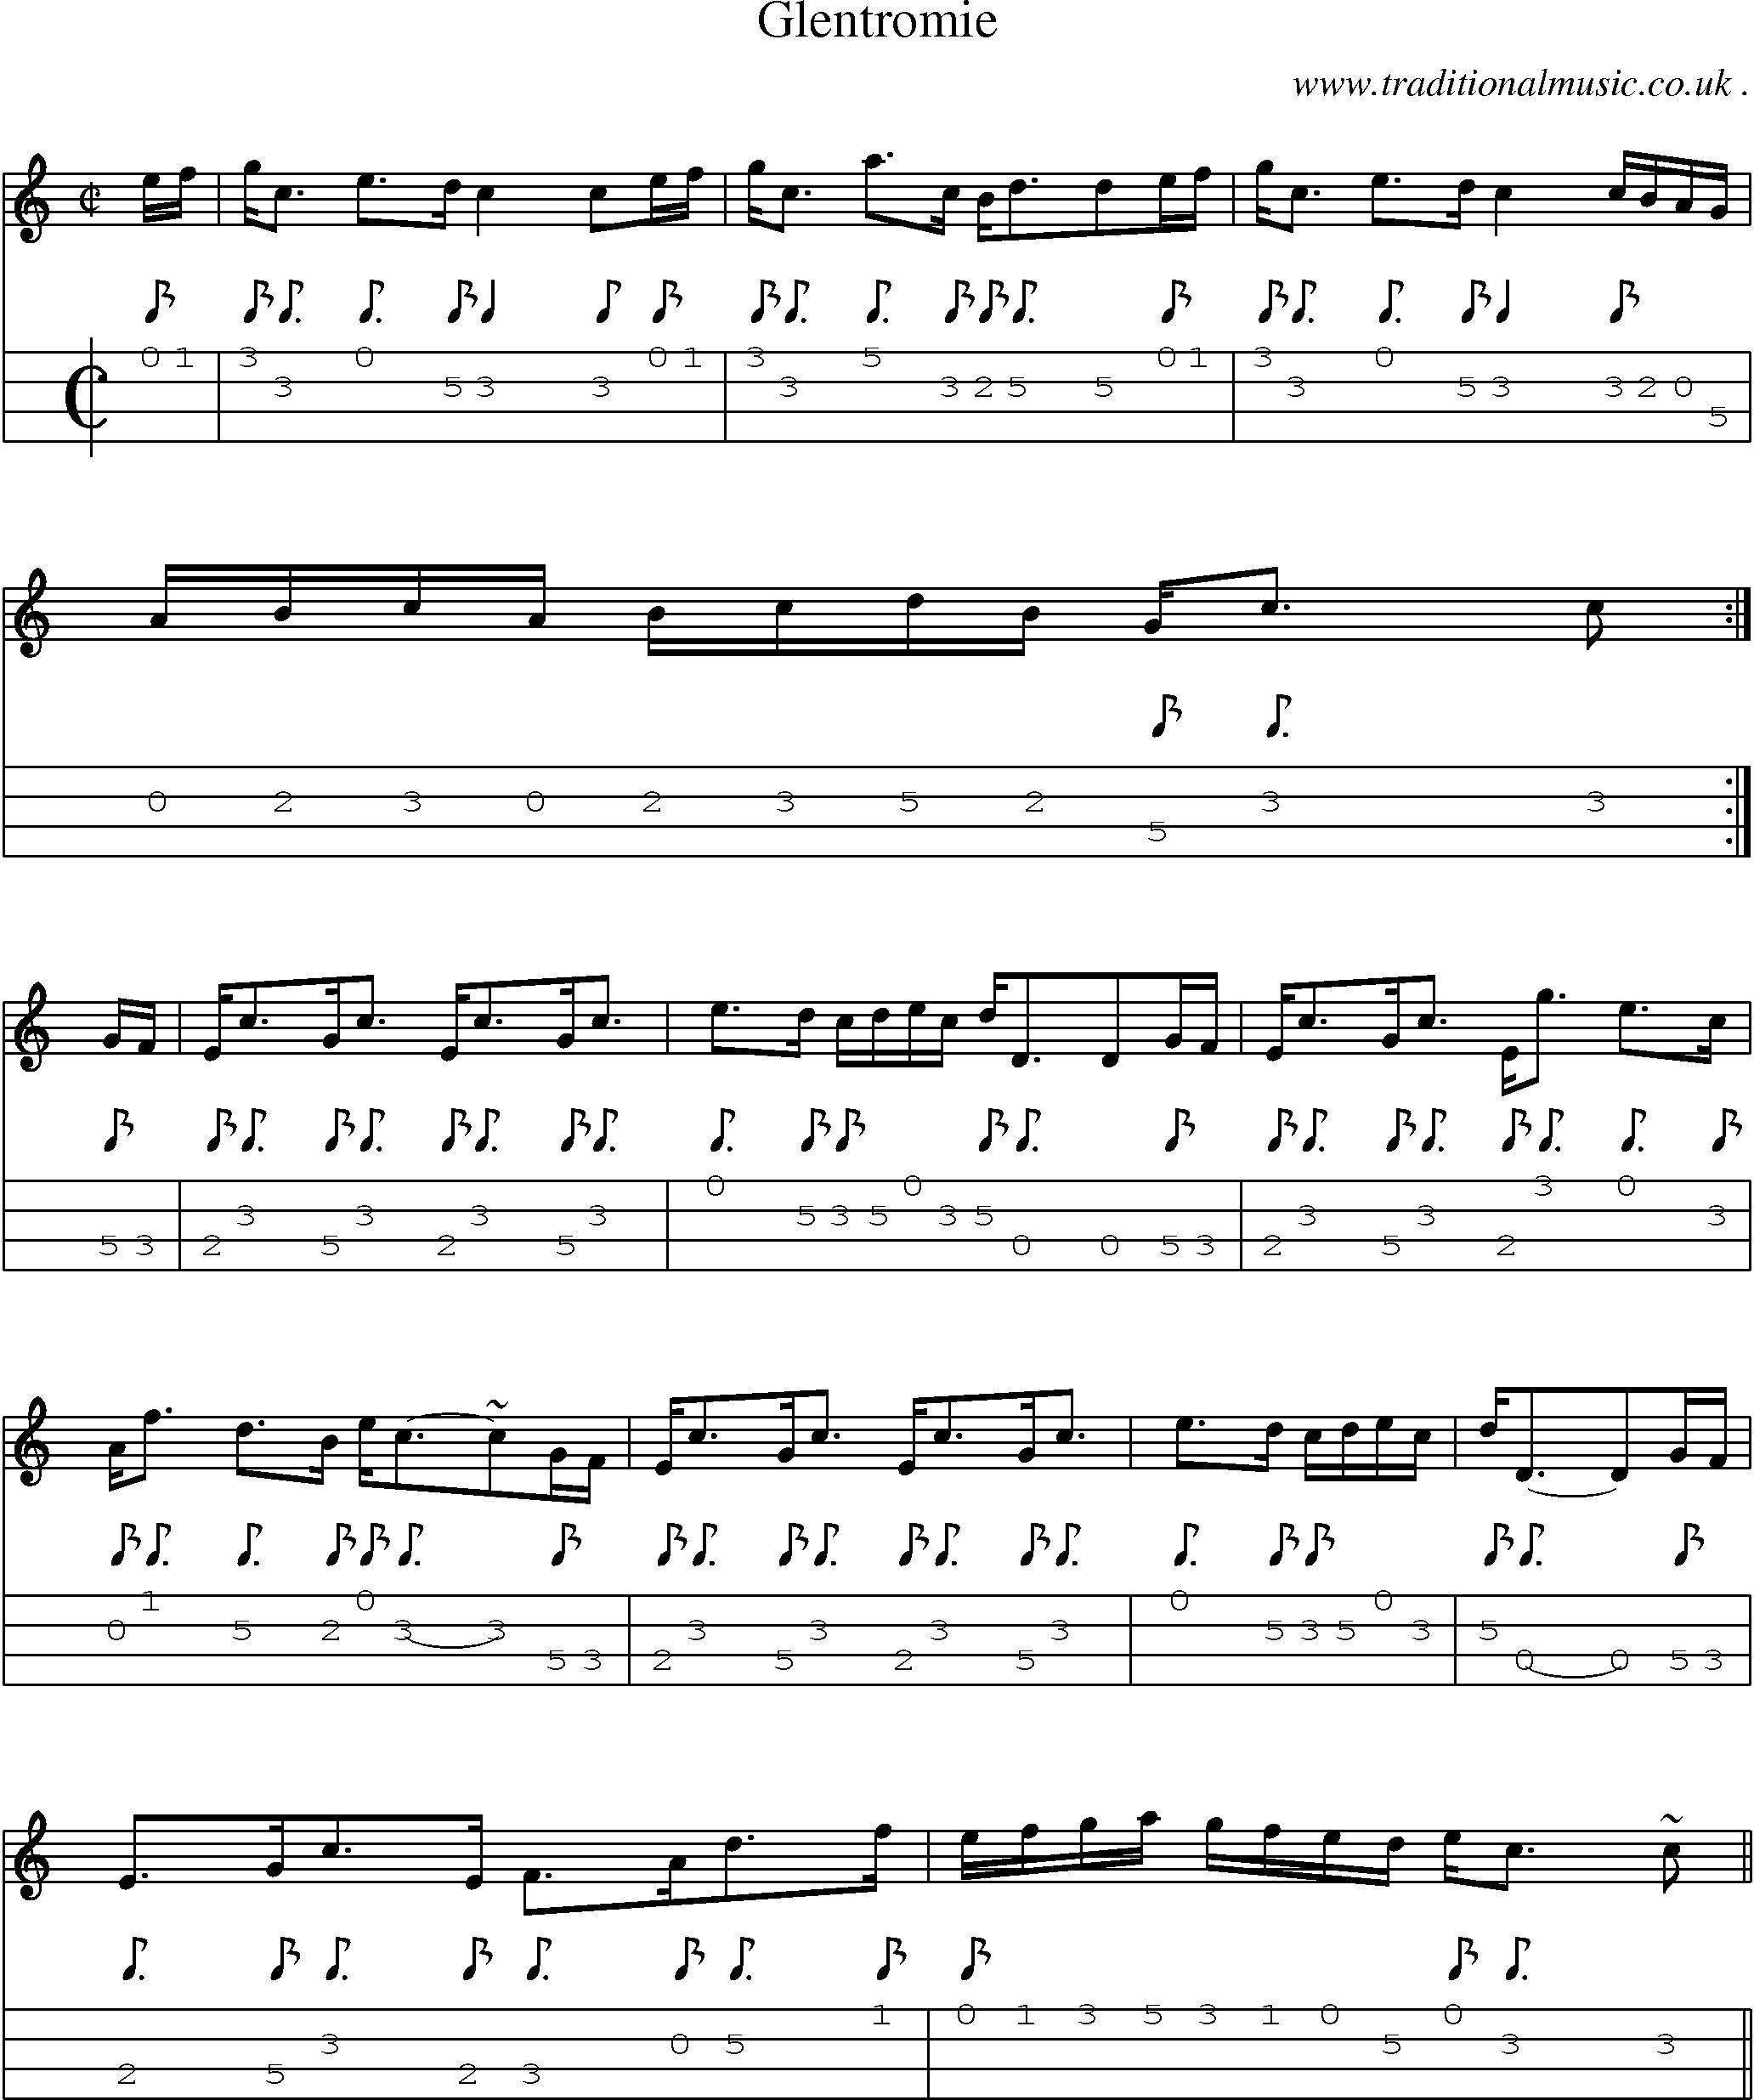 Sheet-music  score, Chords and Mandolin Tabs for Glentromie